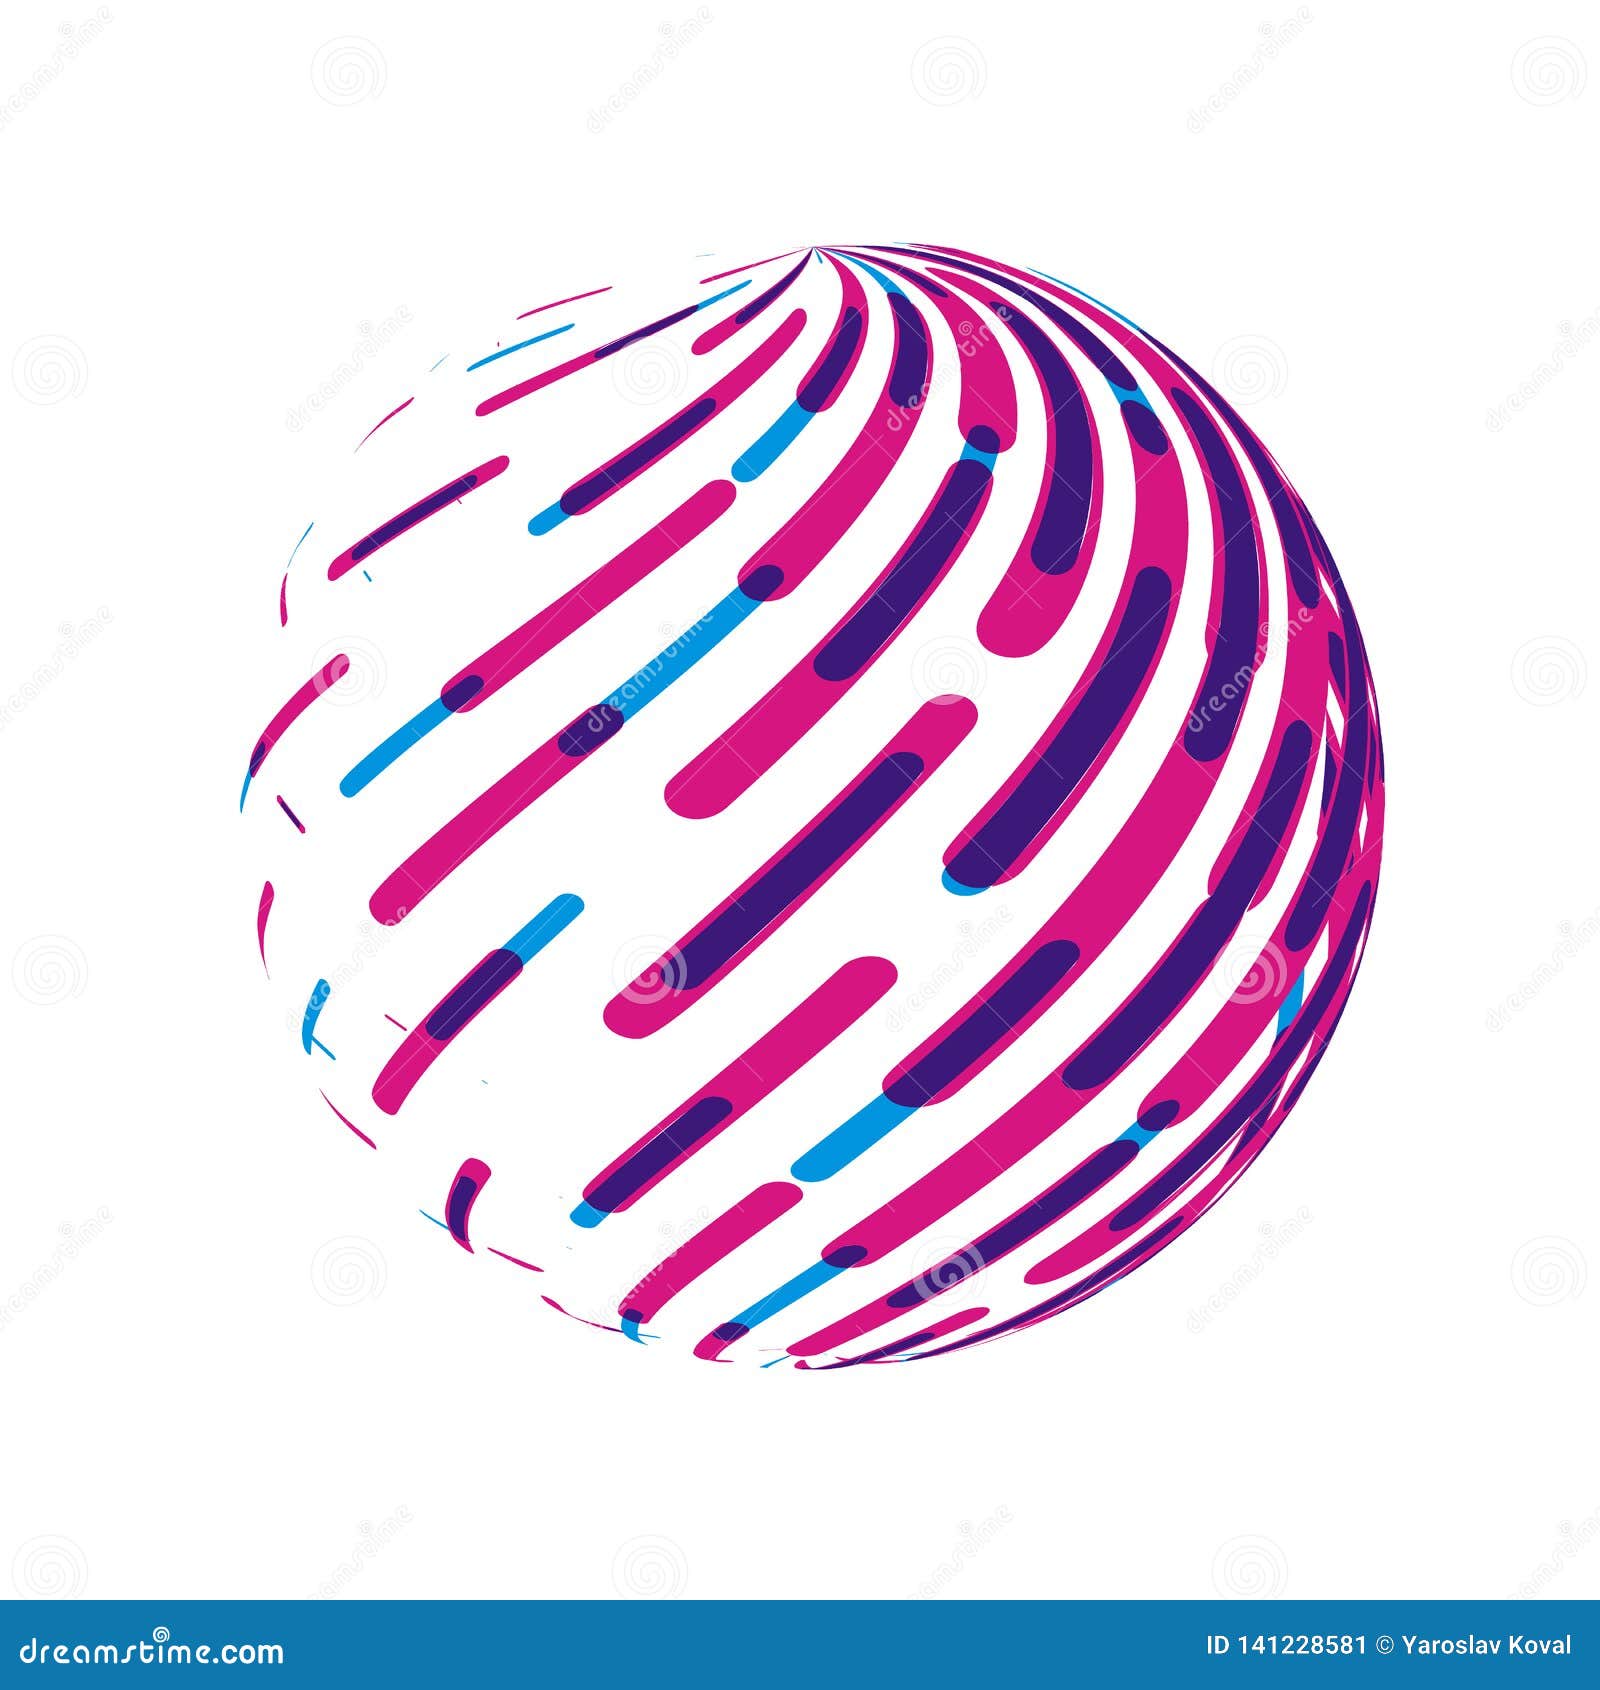 Striped Globe Round Abstract Circle Vector Sign Stock Illustration